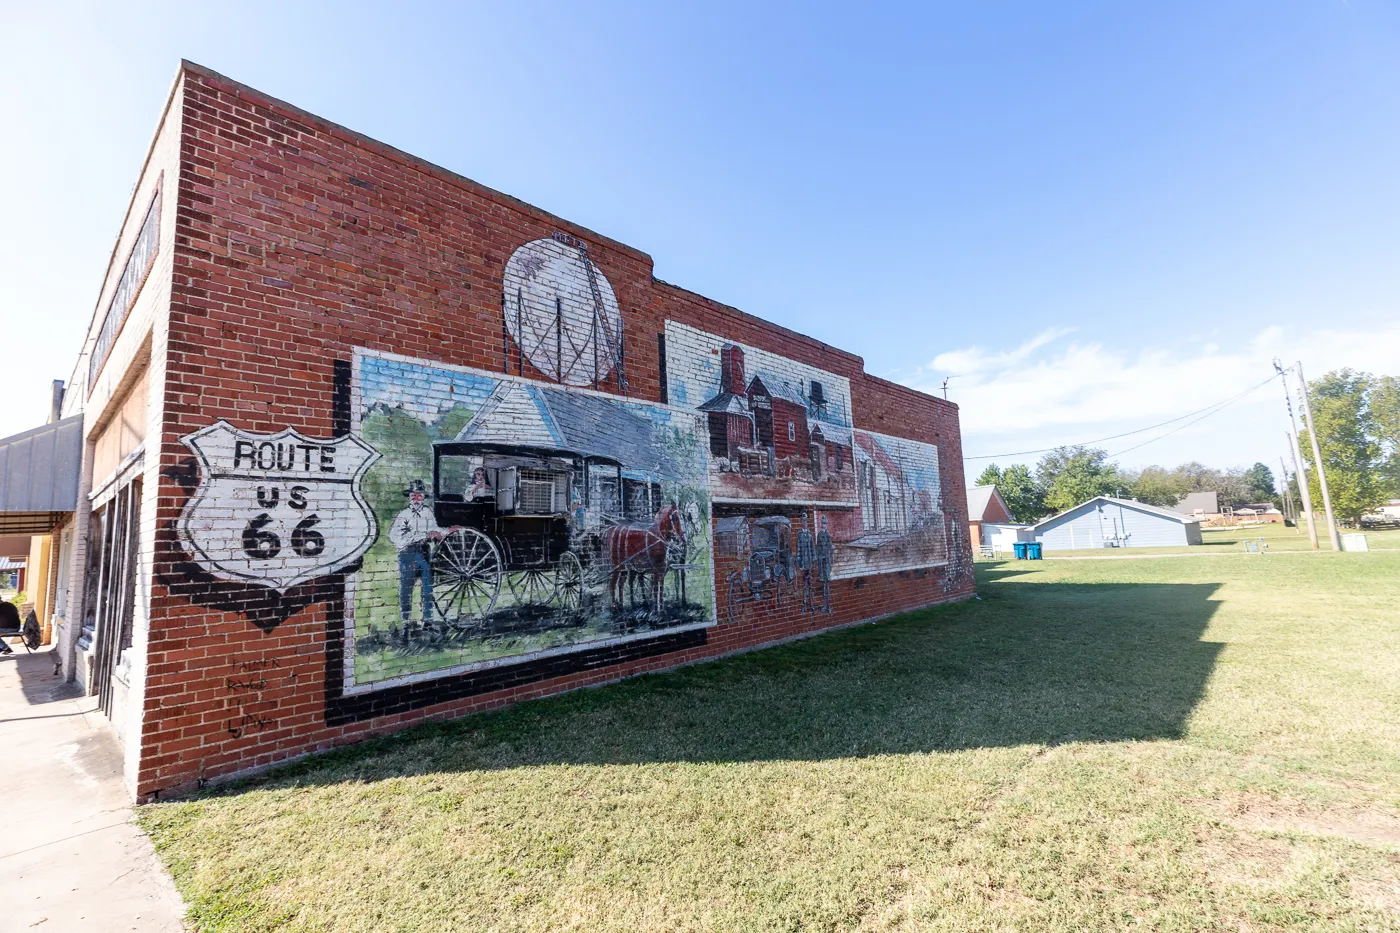 Murals on Route 66 Brick Paved Broadway Street in Davenport, Oklahoma